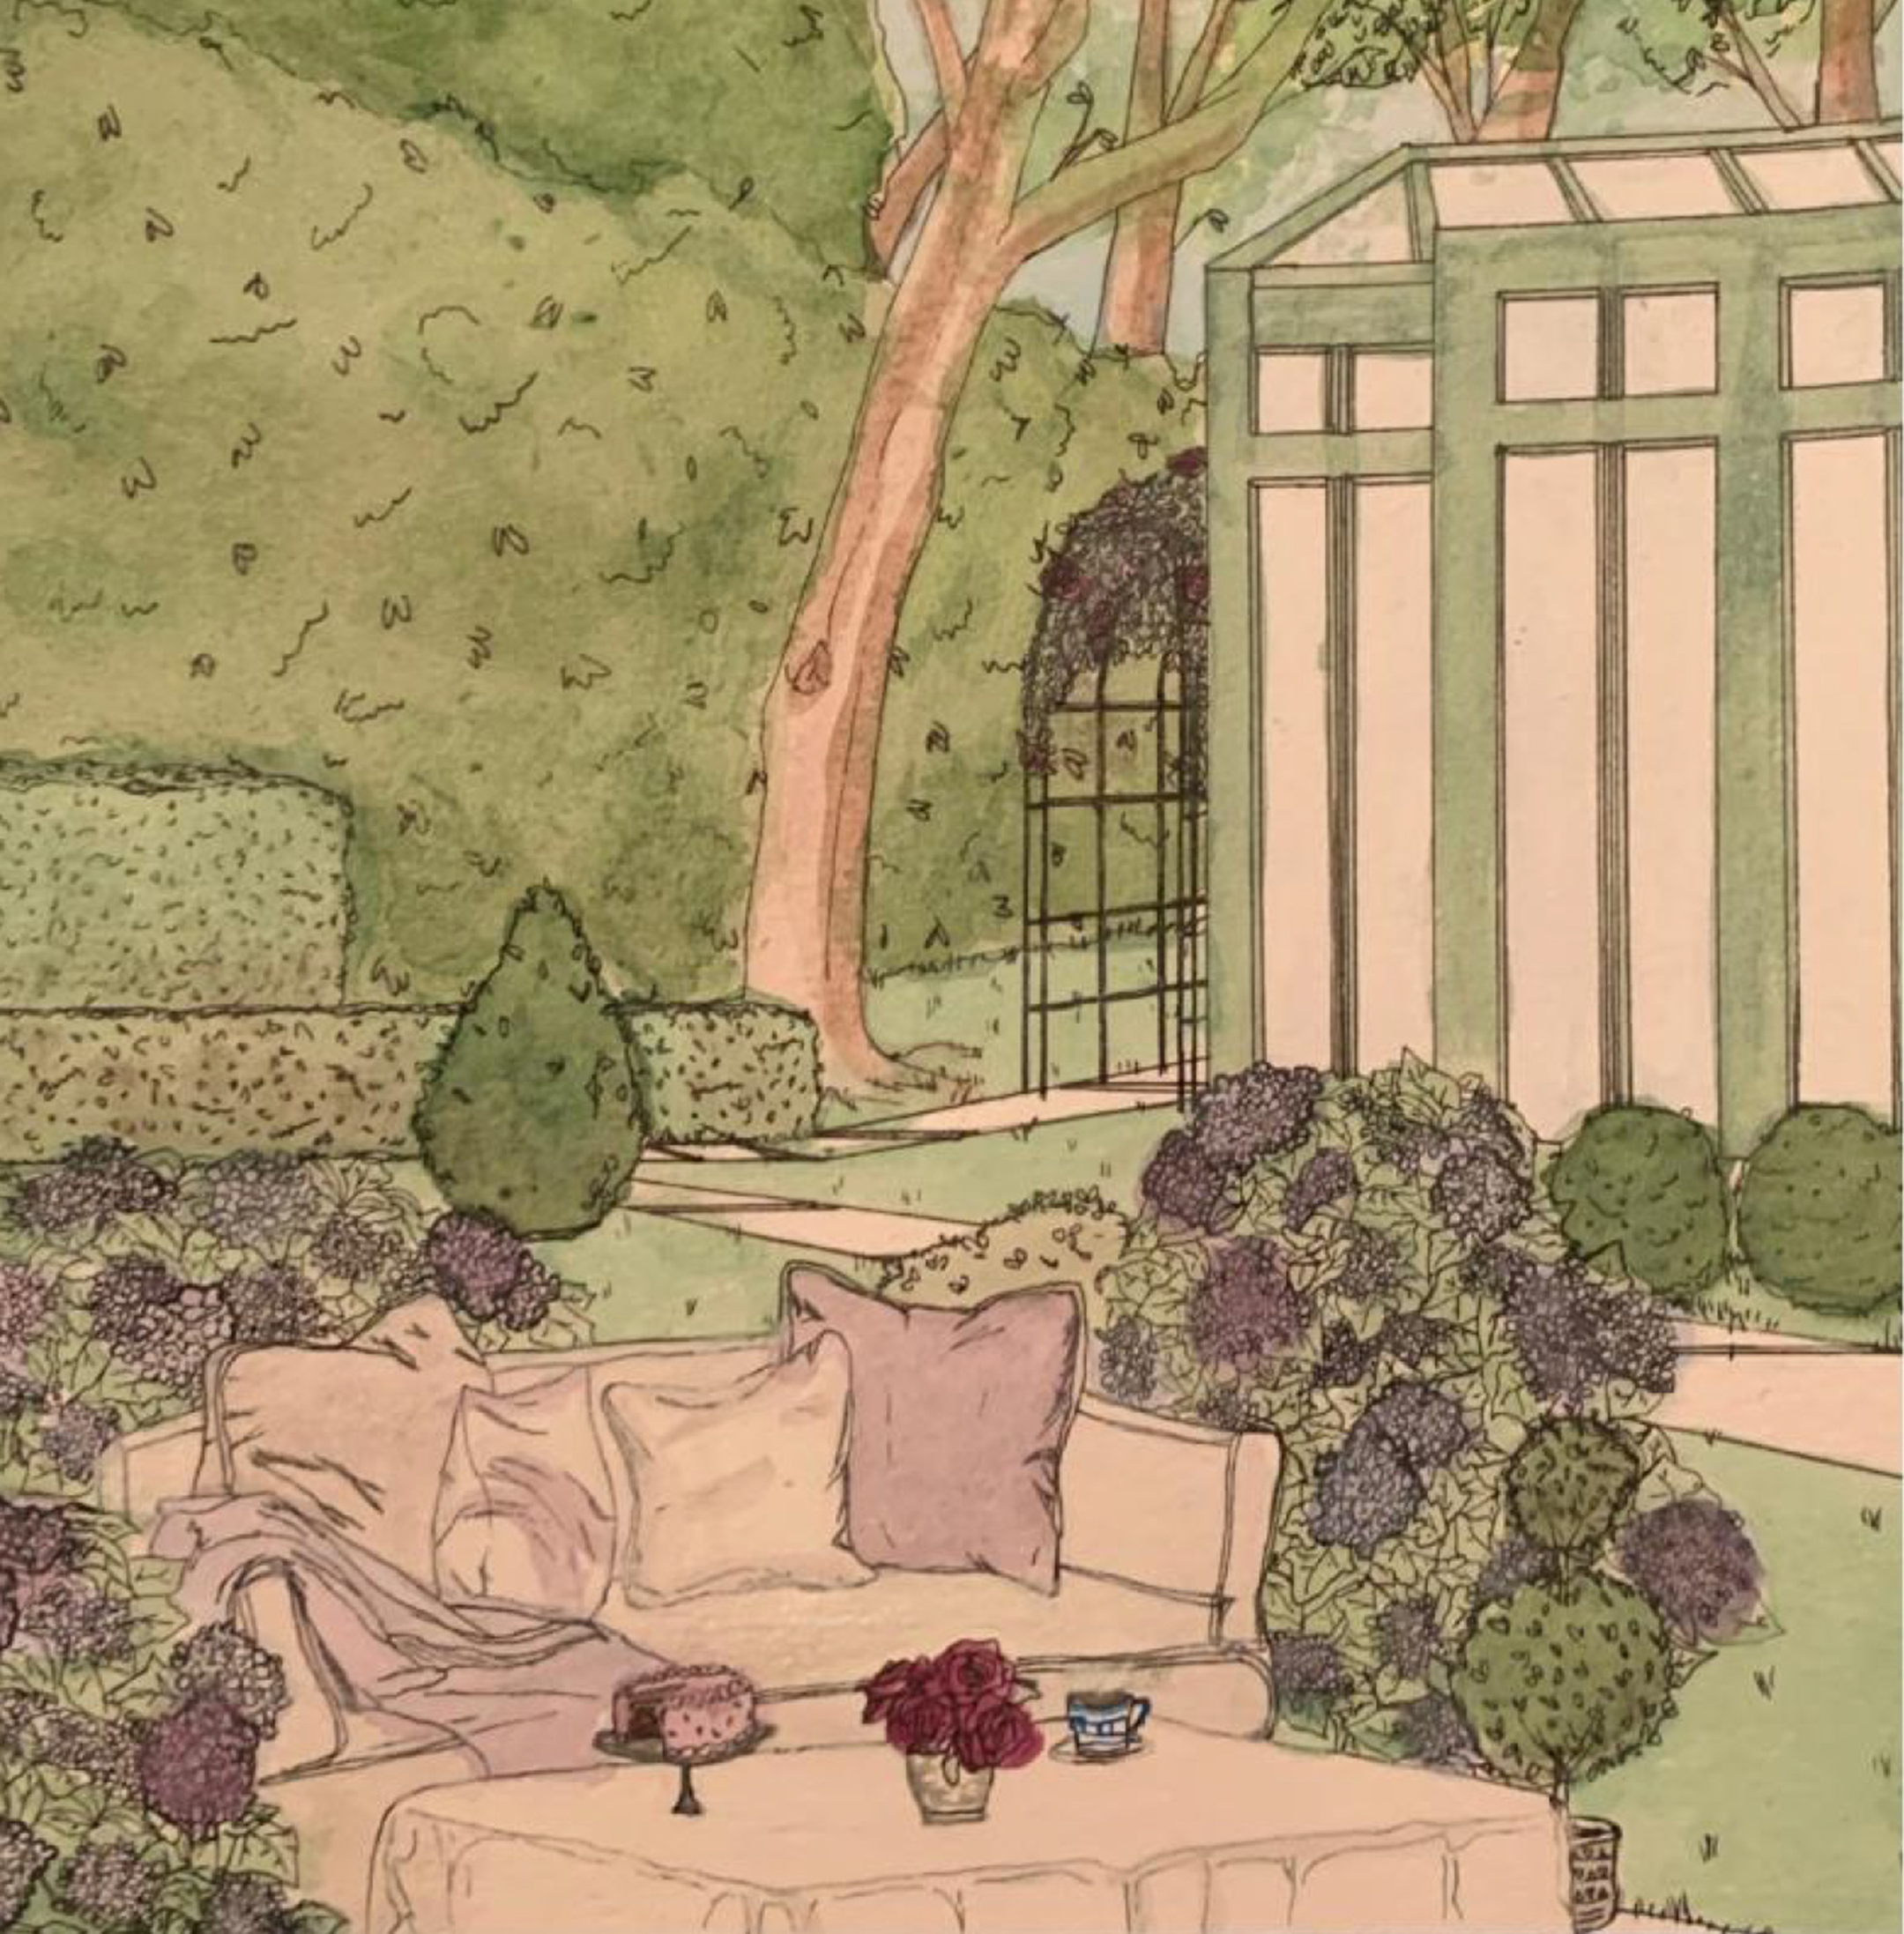 Illustration of a backyard with lawn furniture and a large tree